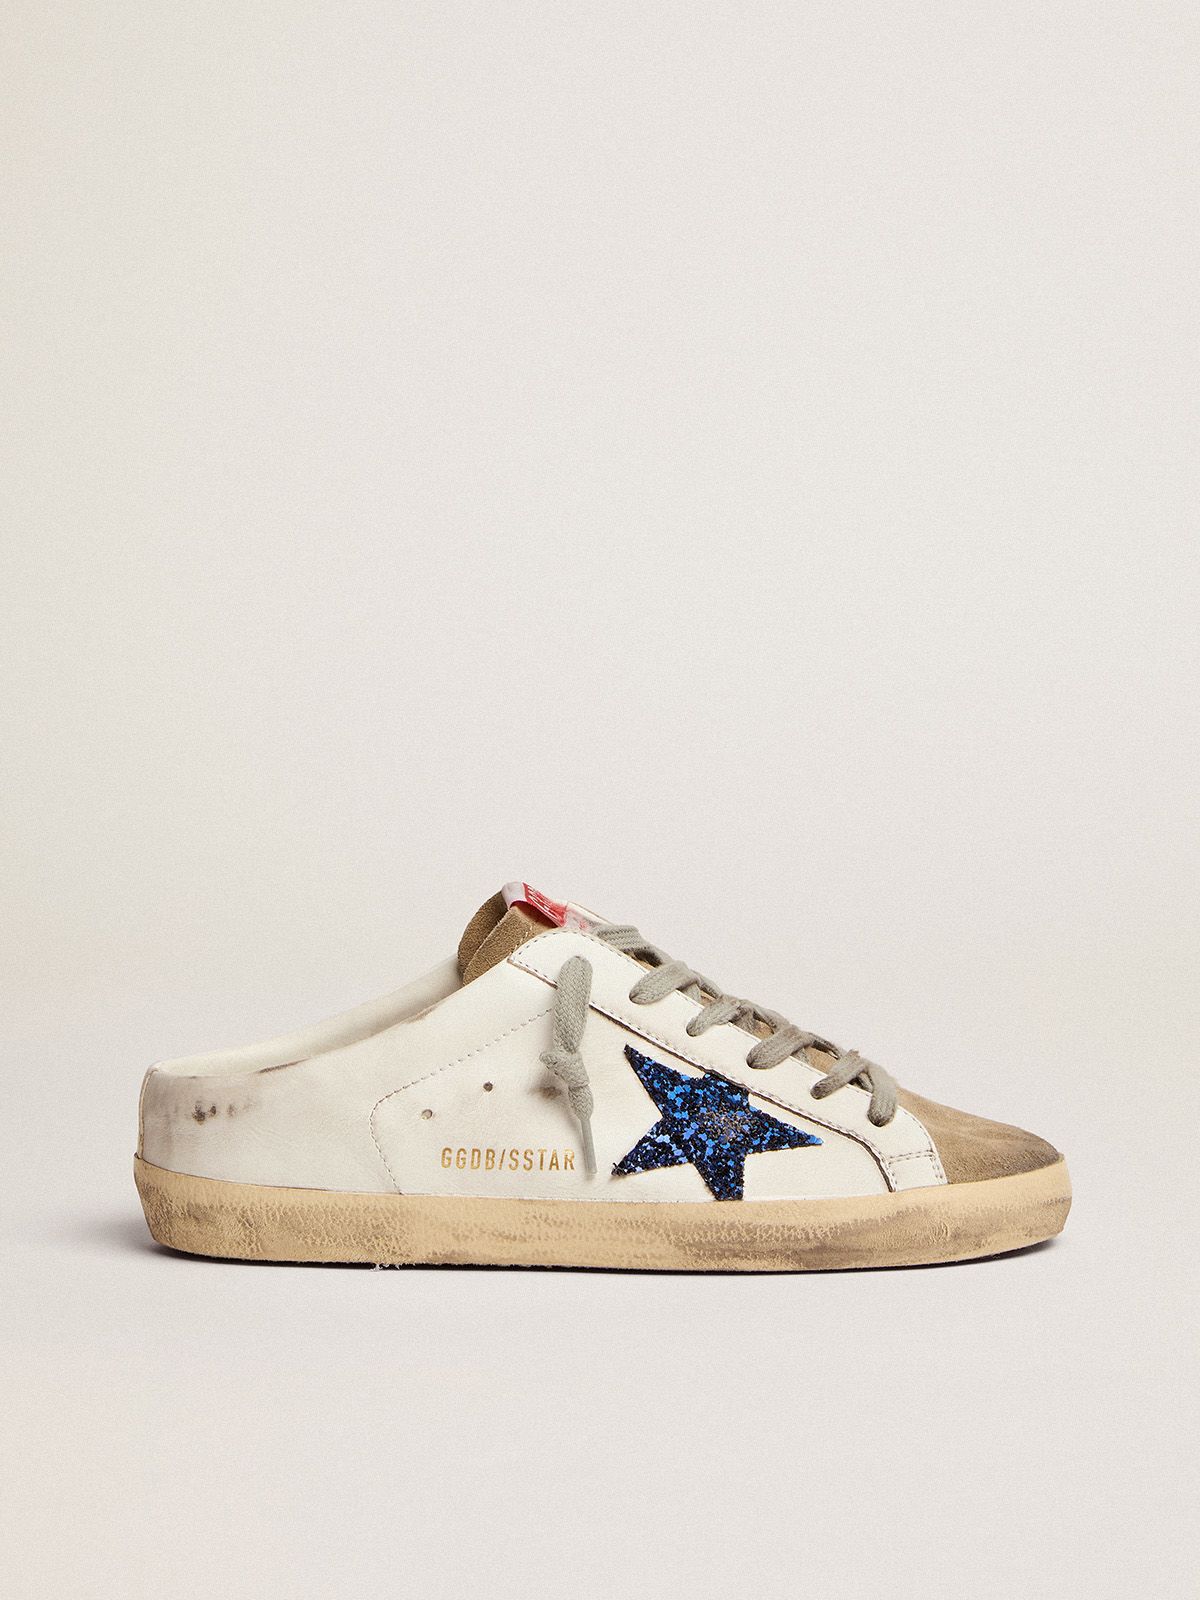 Golden Goose Stardan Super-Star Sabots in white leather with blue glitter star and dove-gray suede tongue